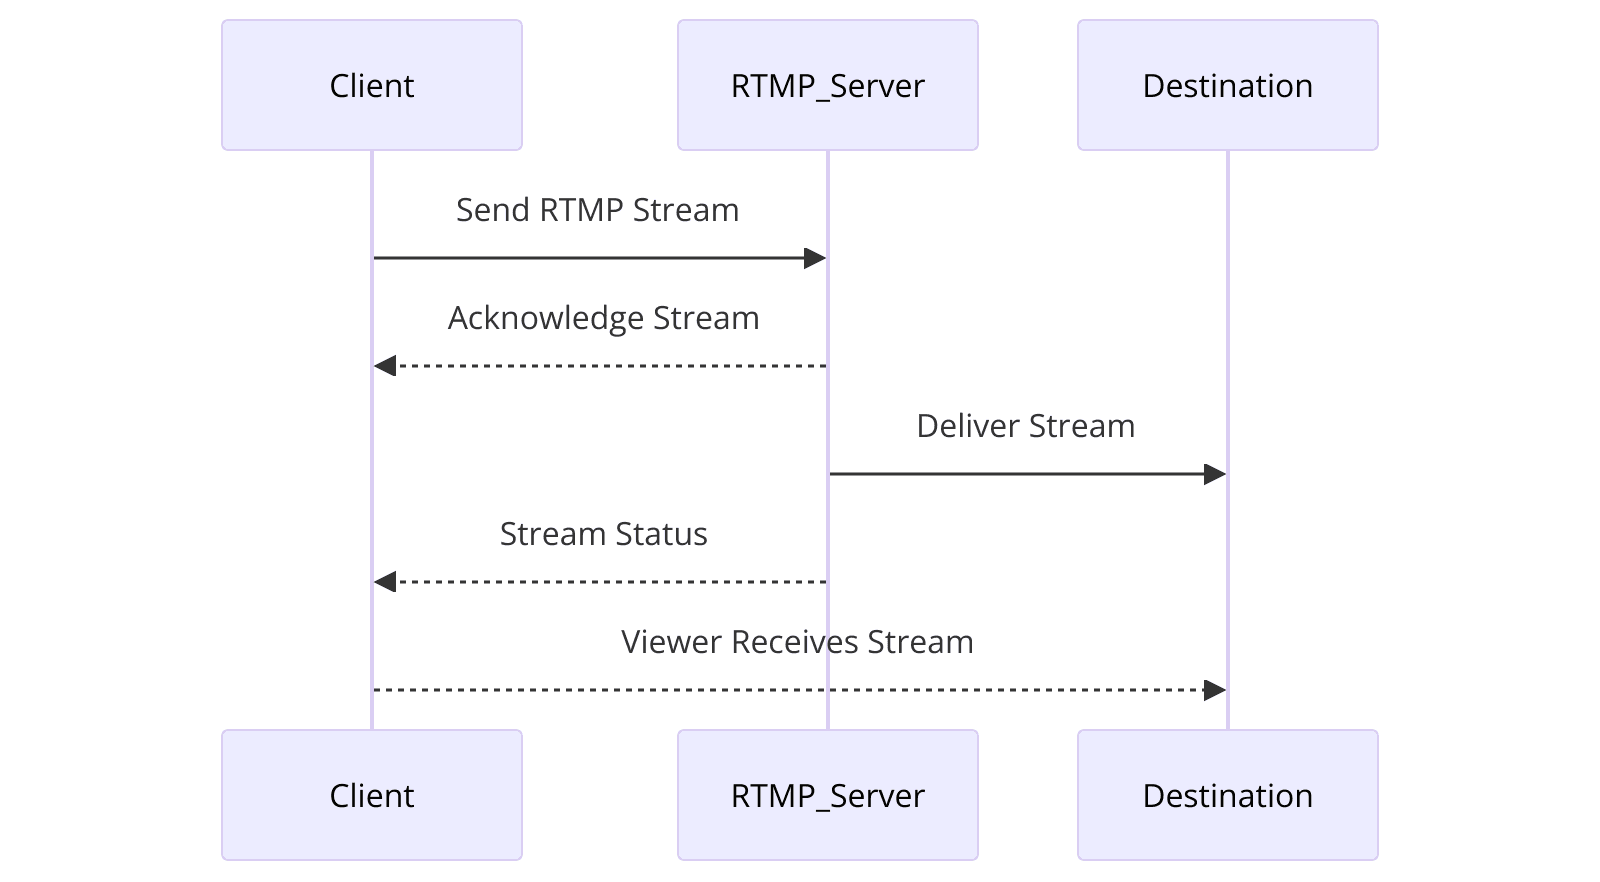 sequence diagram of how RTMP works